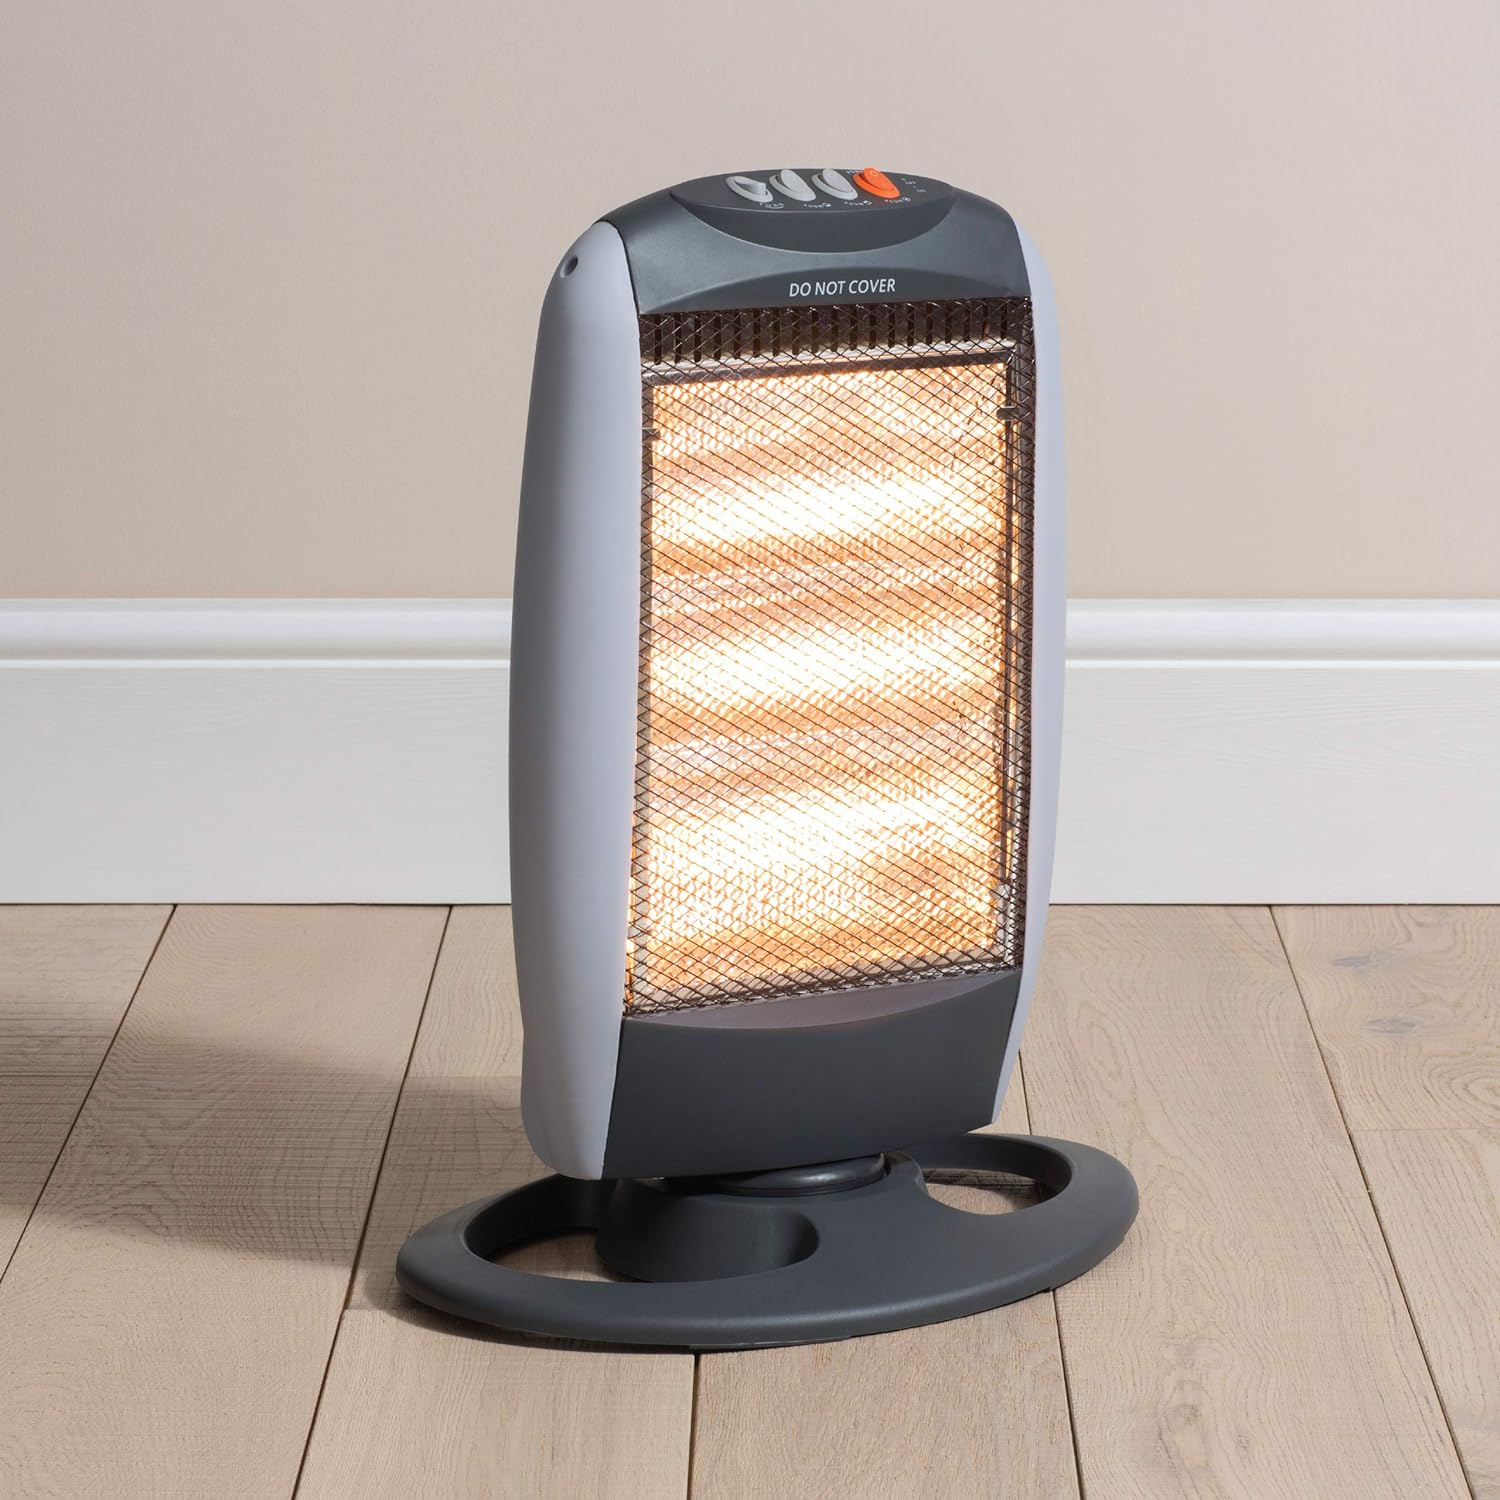 Daewoo Oscillating Halogen Heater With Tip Over Cut-Out, 3 Heat Settings, and Instant Heat Glow